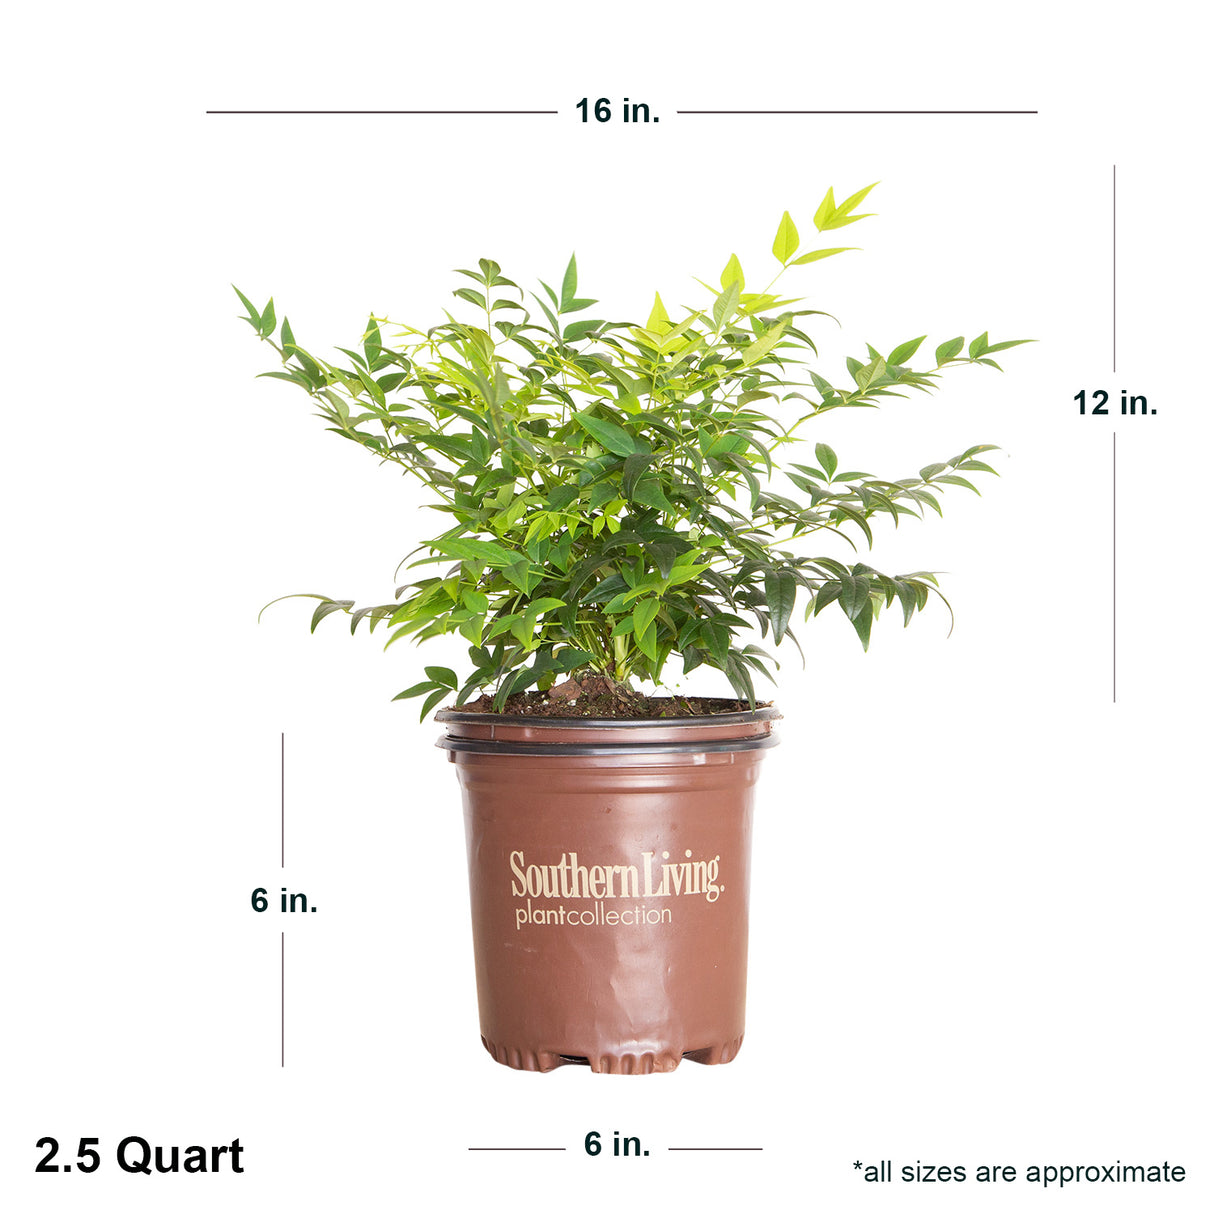 2.5 Quart Lemon Lime Nandina in southern living container showing dimensions.